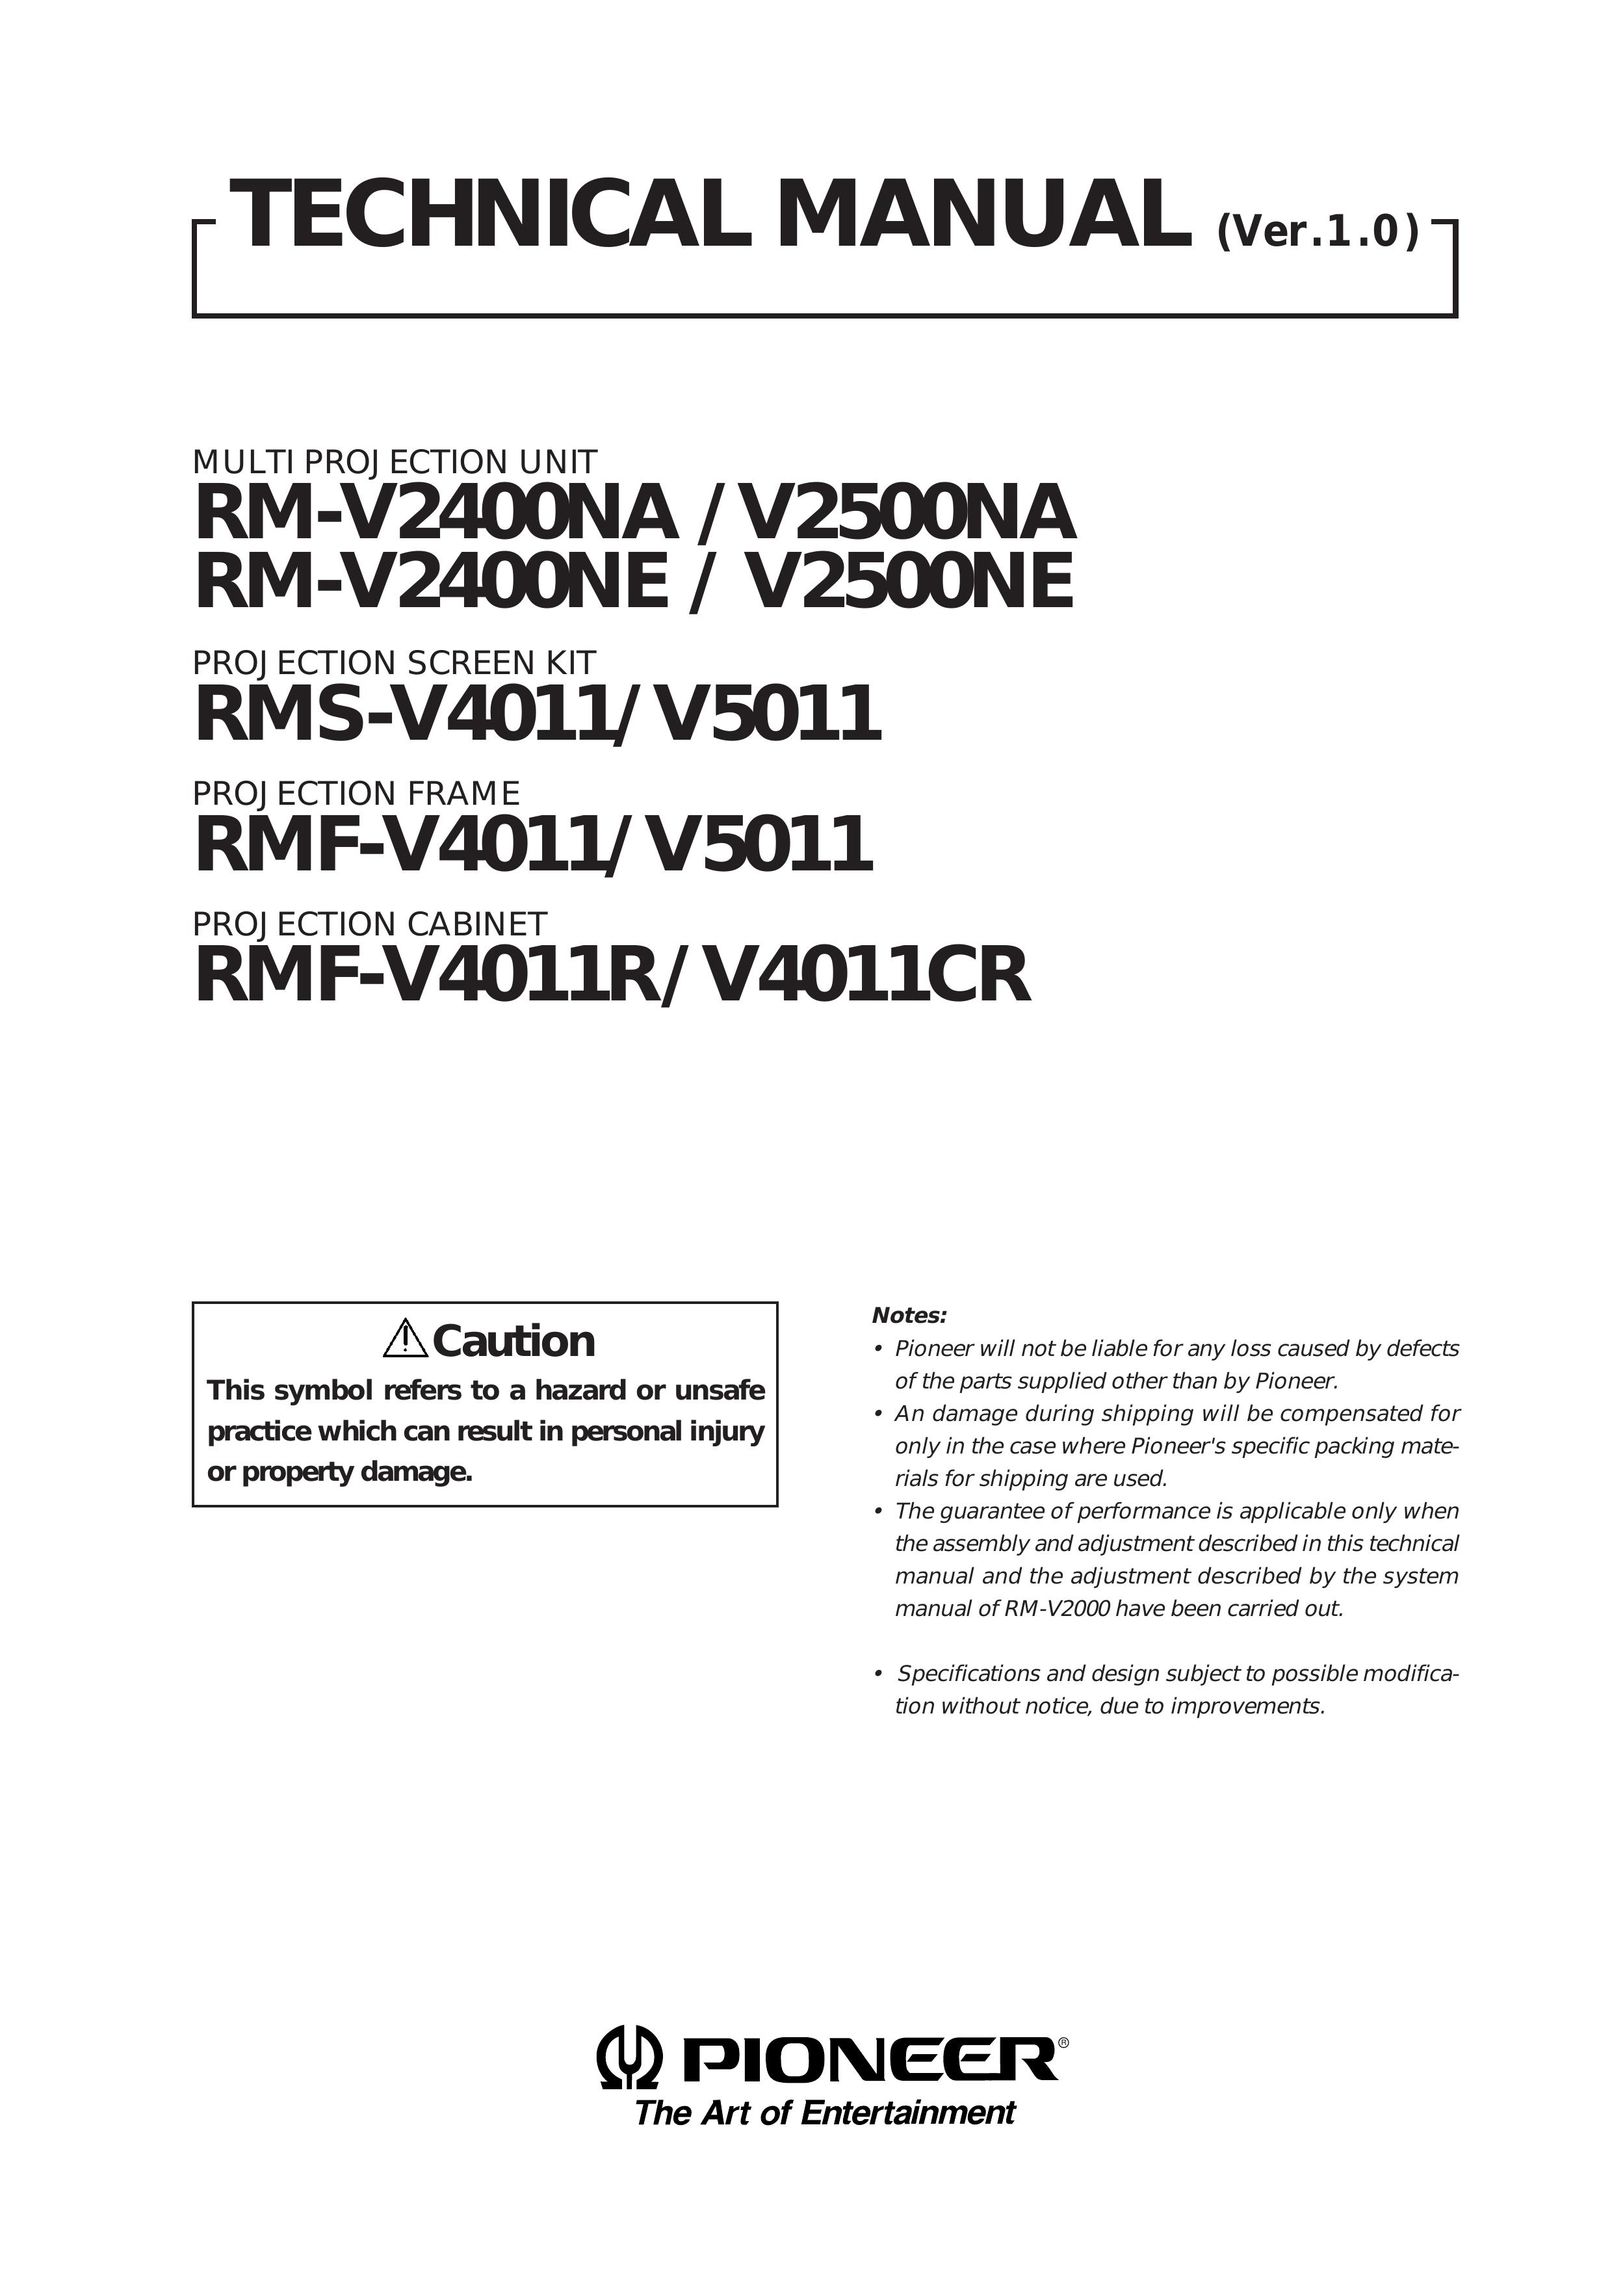 Pioneer RM-V2400NA Projector User Manual